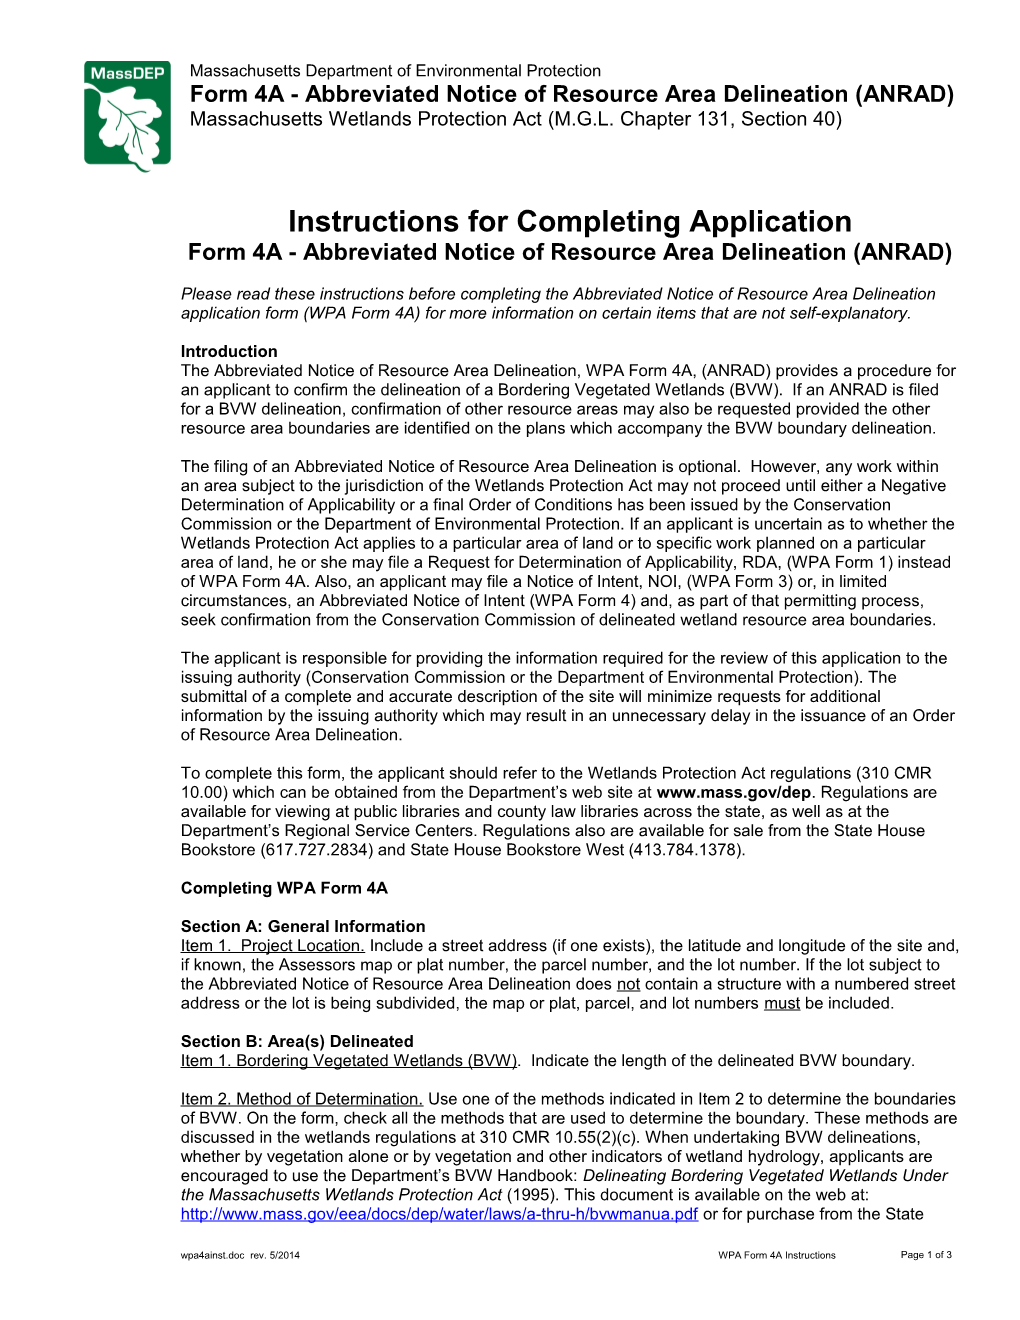 Instructions for Completing Application s1